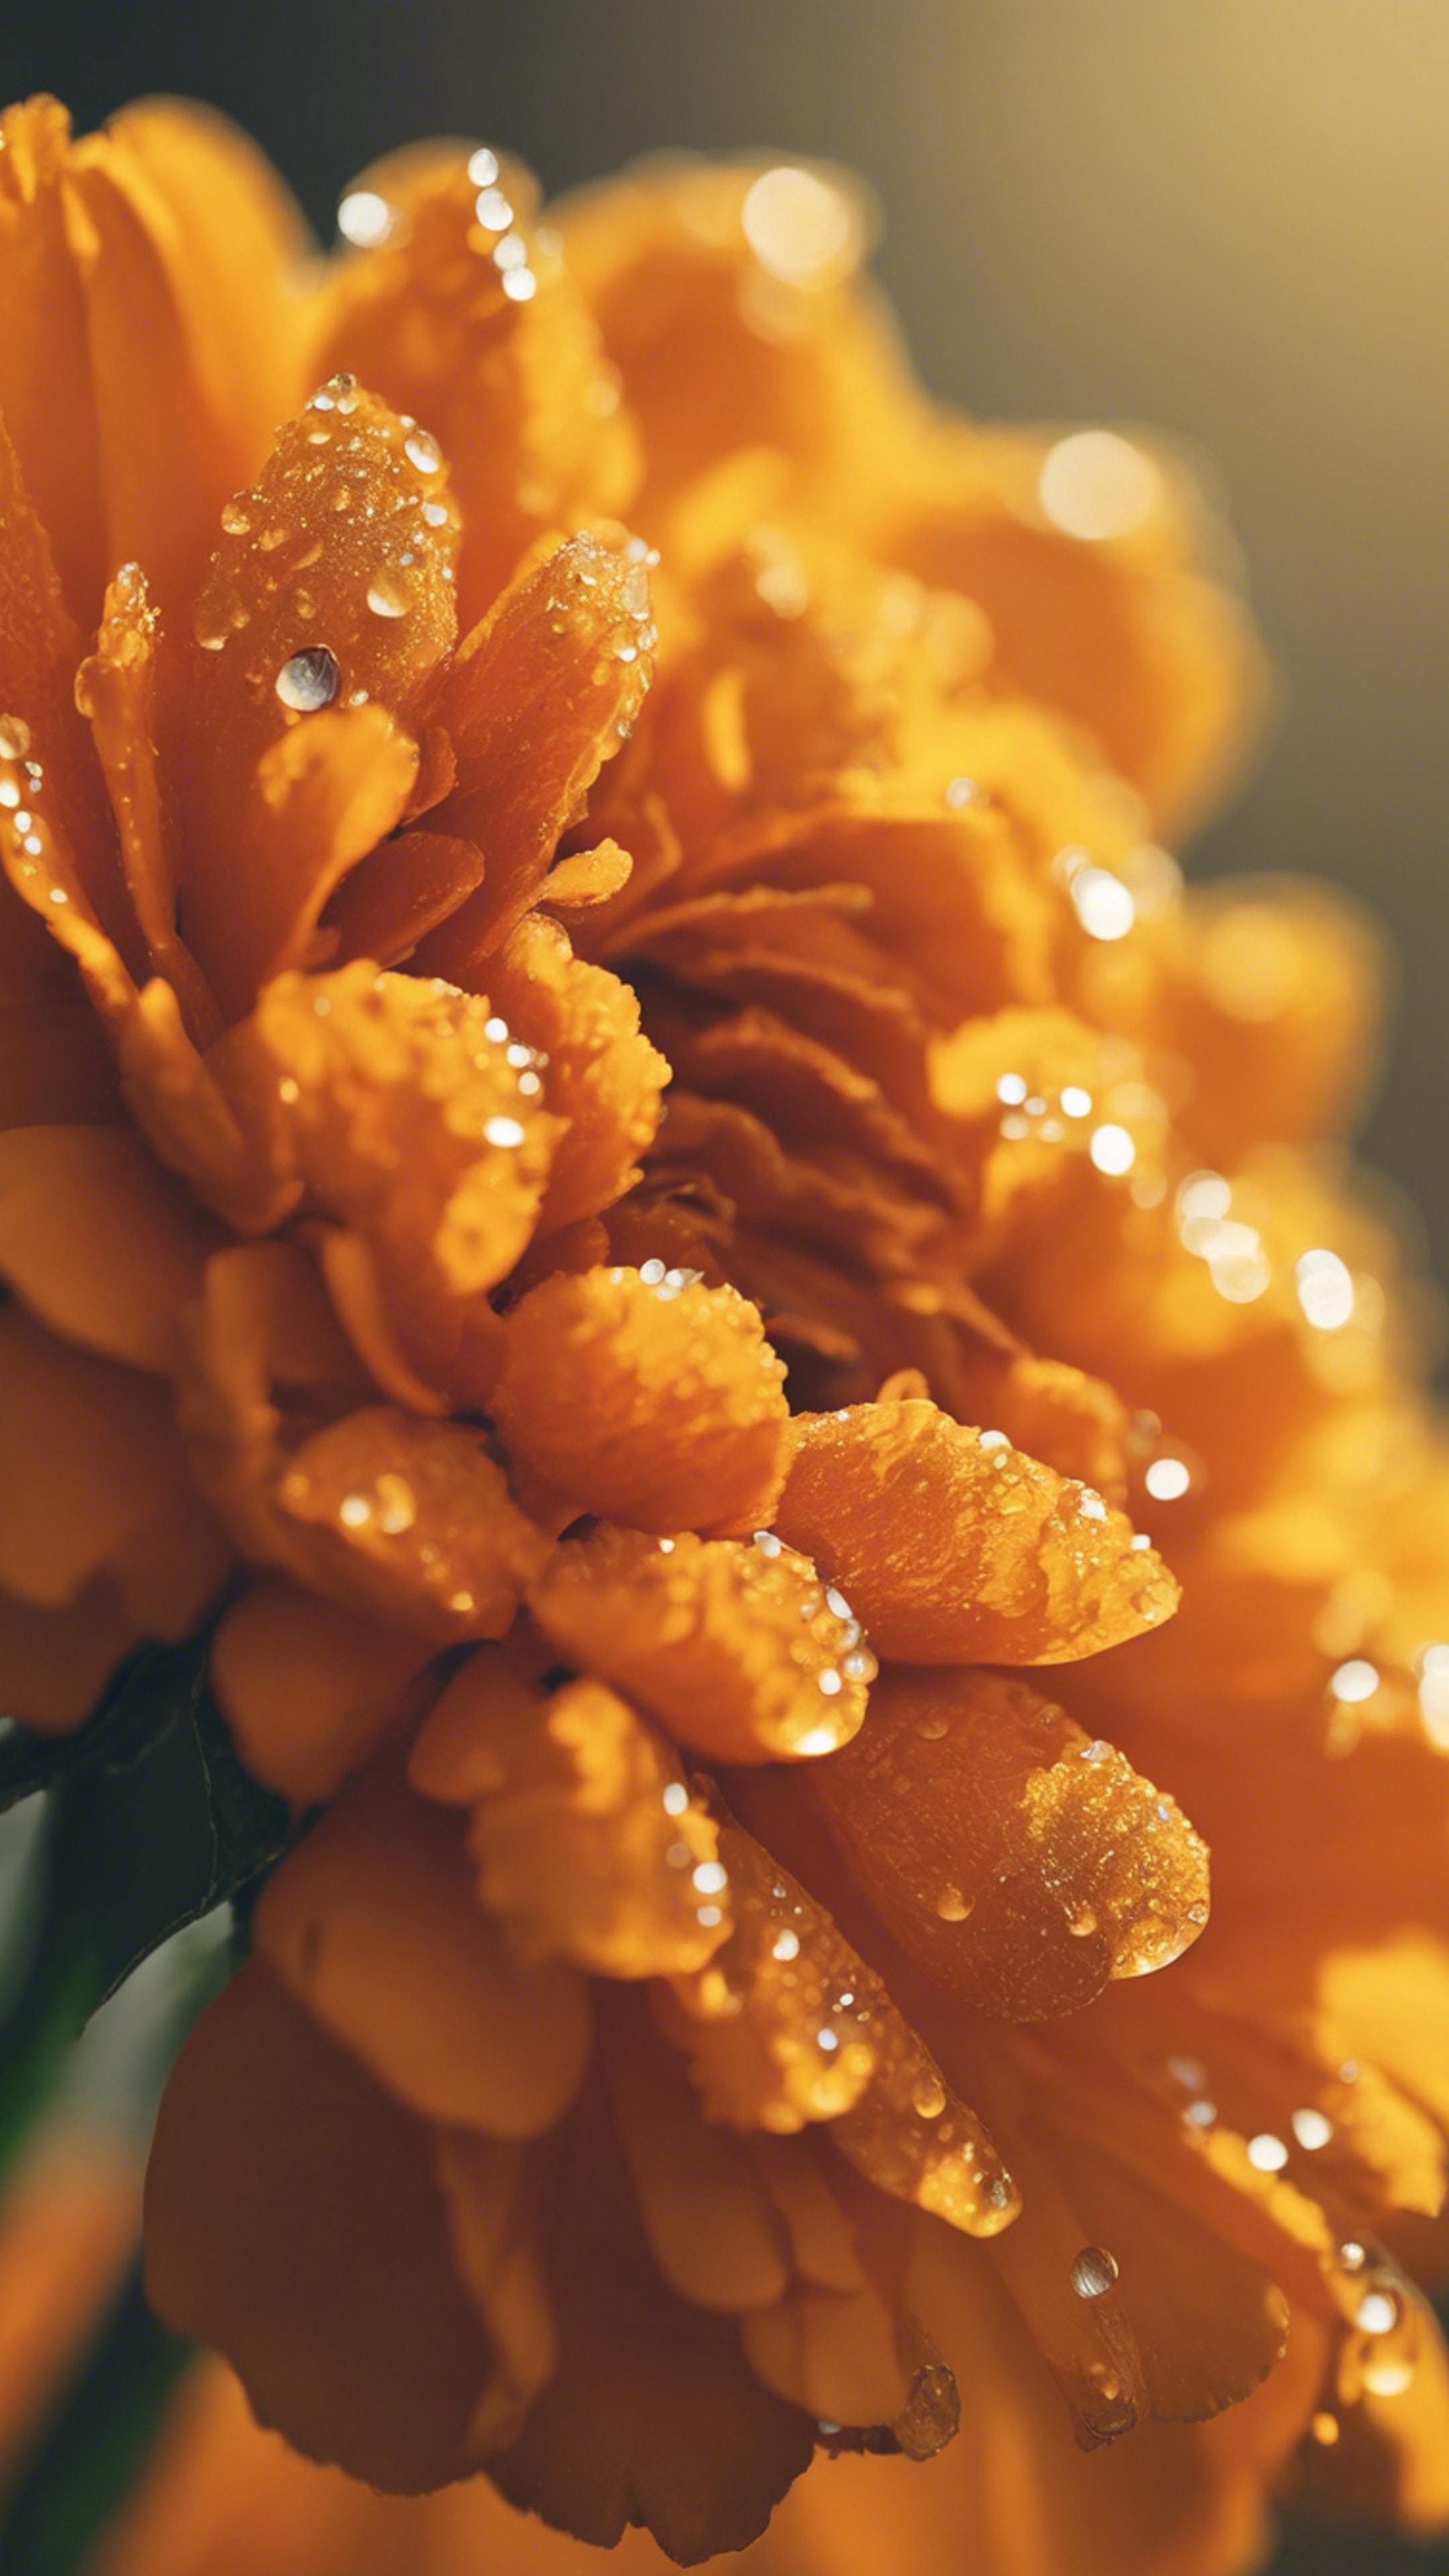 A close-up of an orange marigold with drops of morning dew shimmering on it, set against a calm yellowish background.壁紙[e9f9e17546d94298a326]